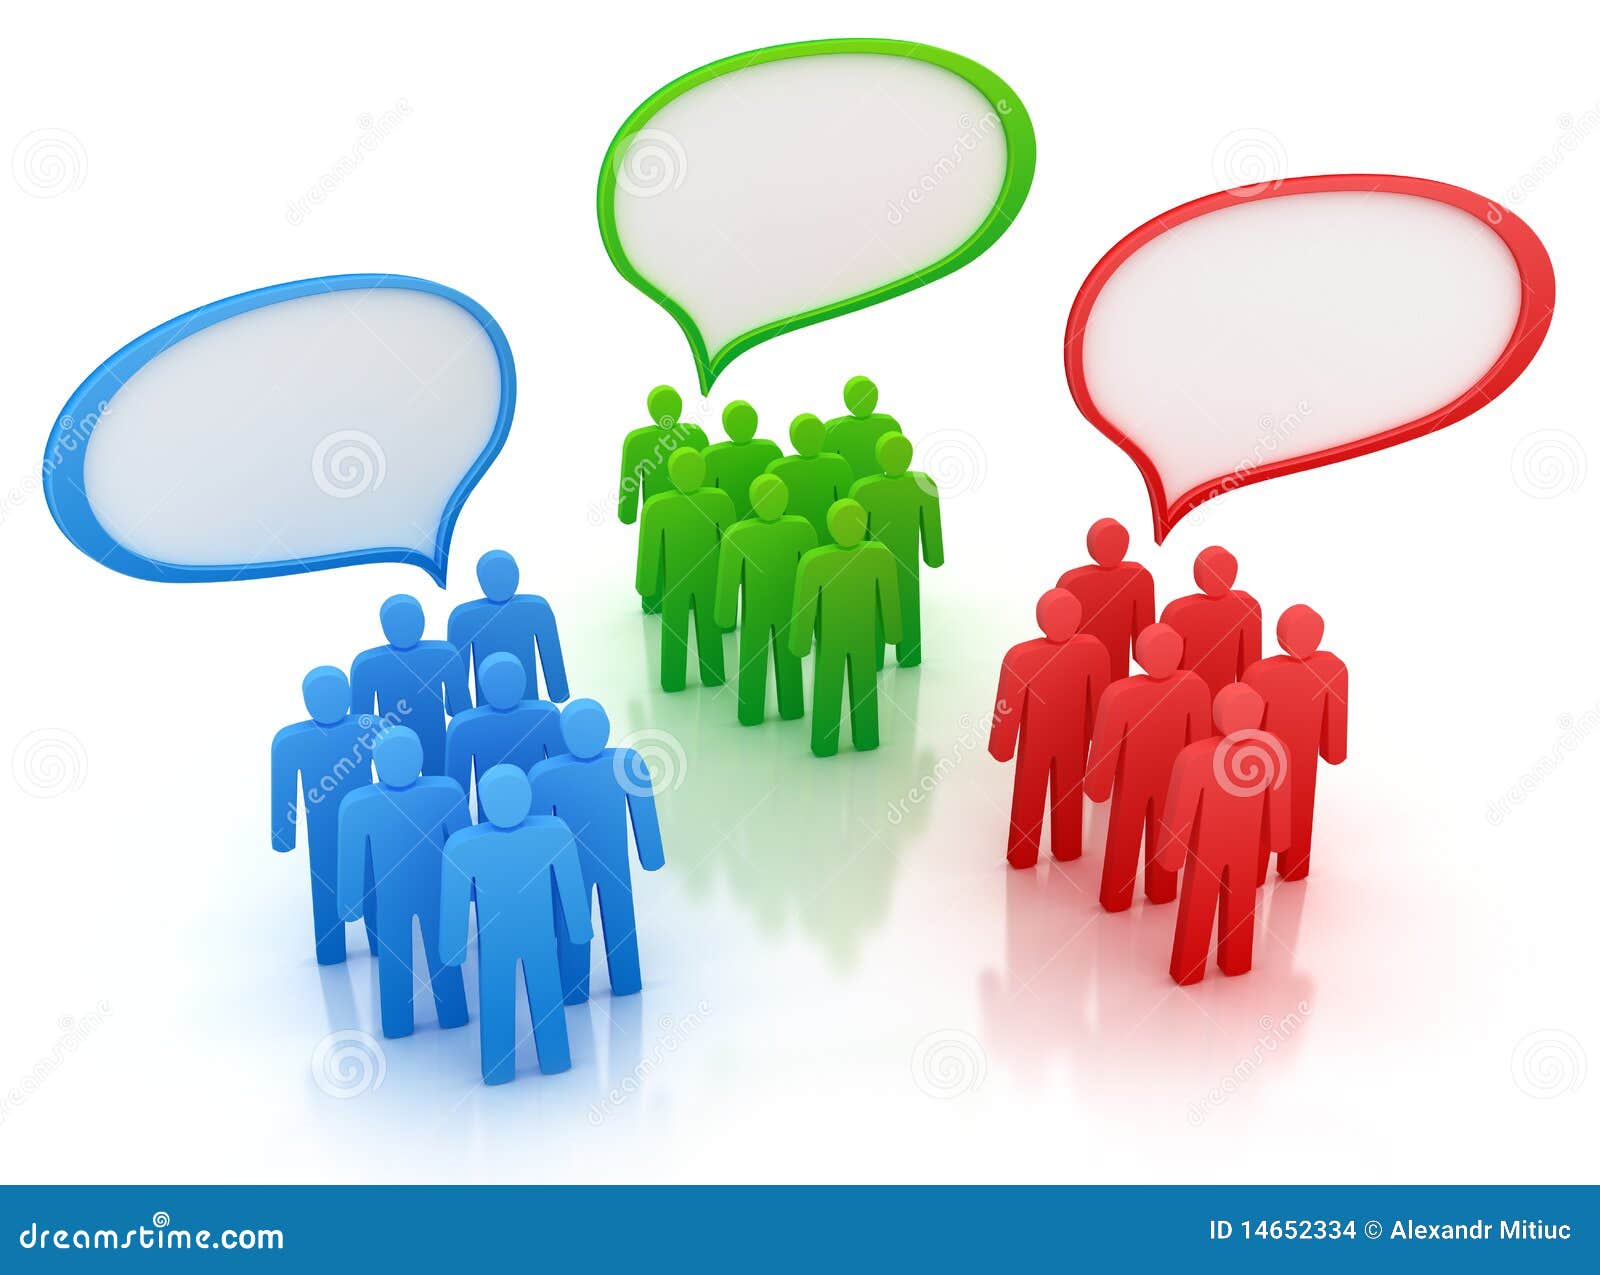 Diferent Views of People Group . Stock Illustration - Illustration of ...